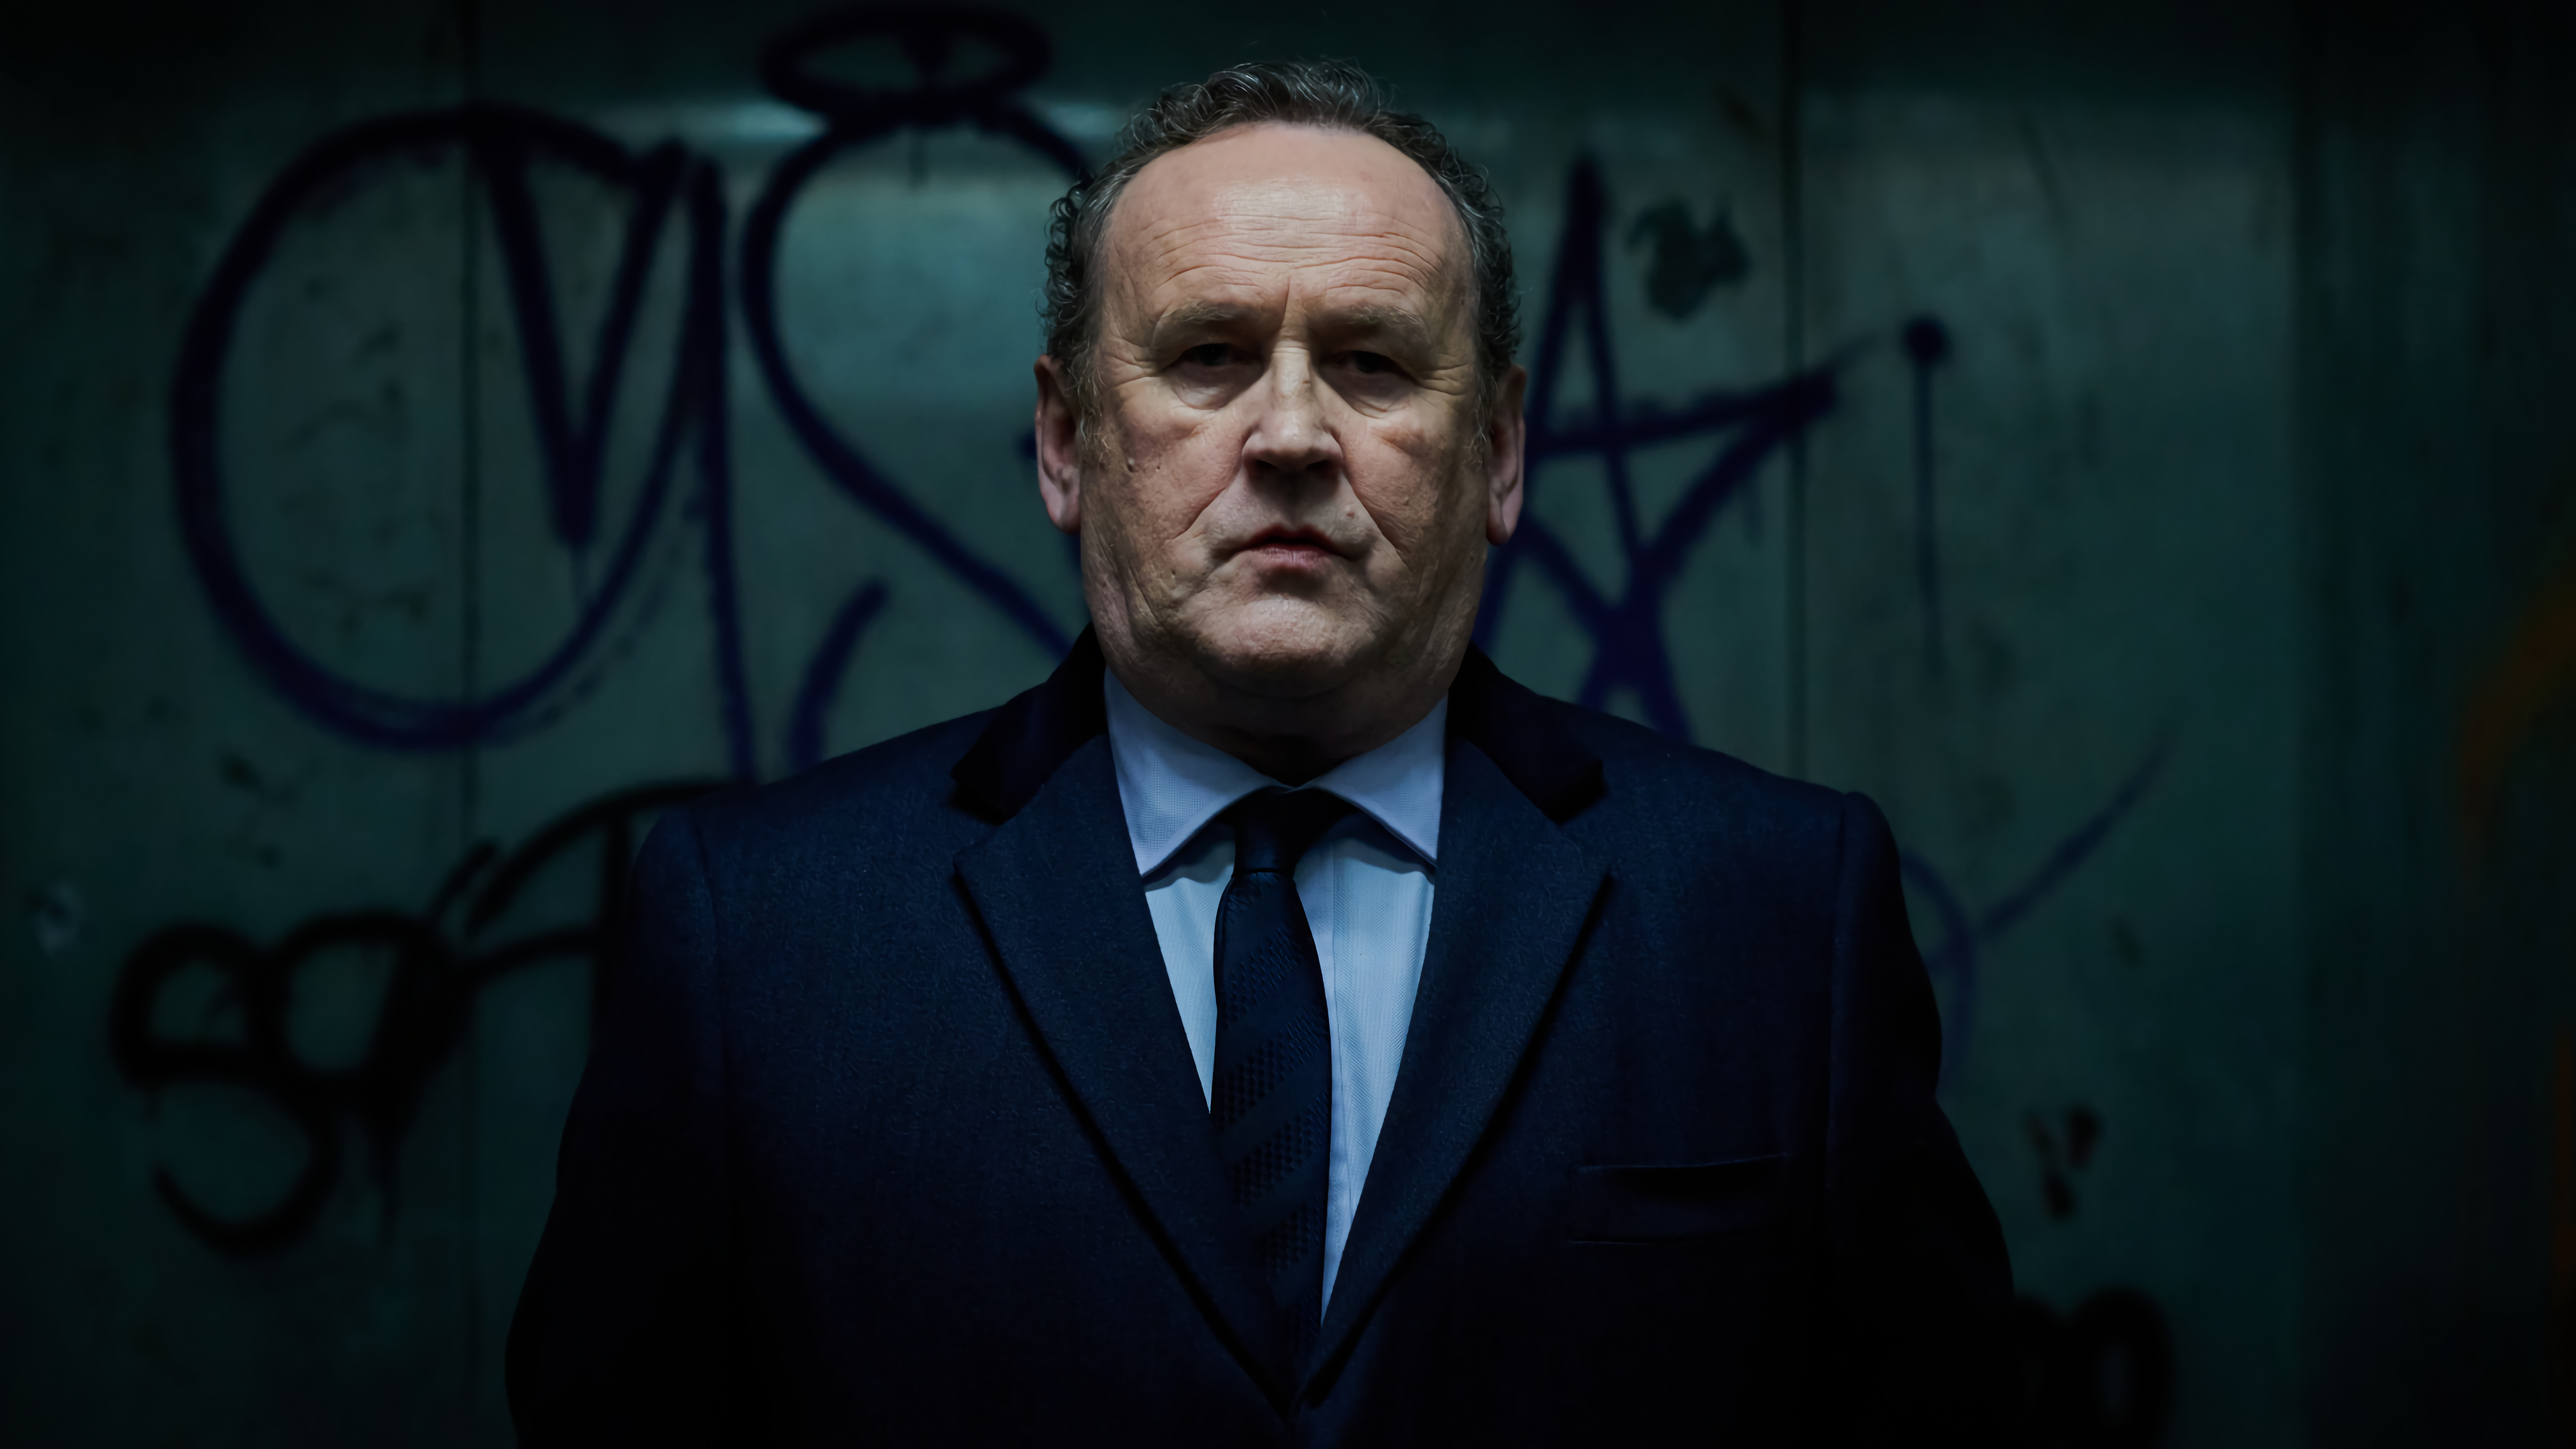 People 3840x2160 Gangs of London Finn Wallace wall suits tie old people Colm Meaney TV series actor graffiti film stills men